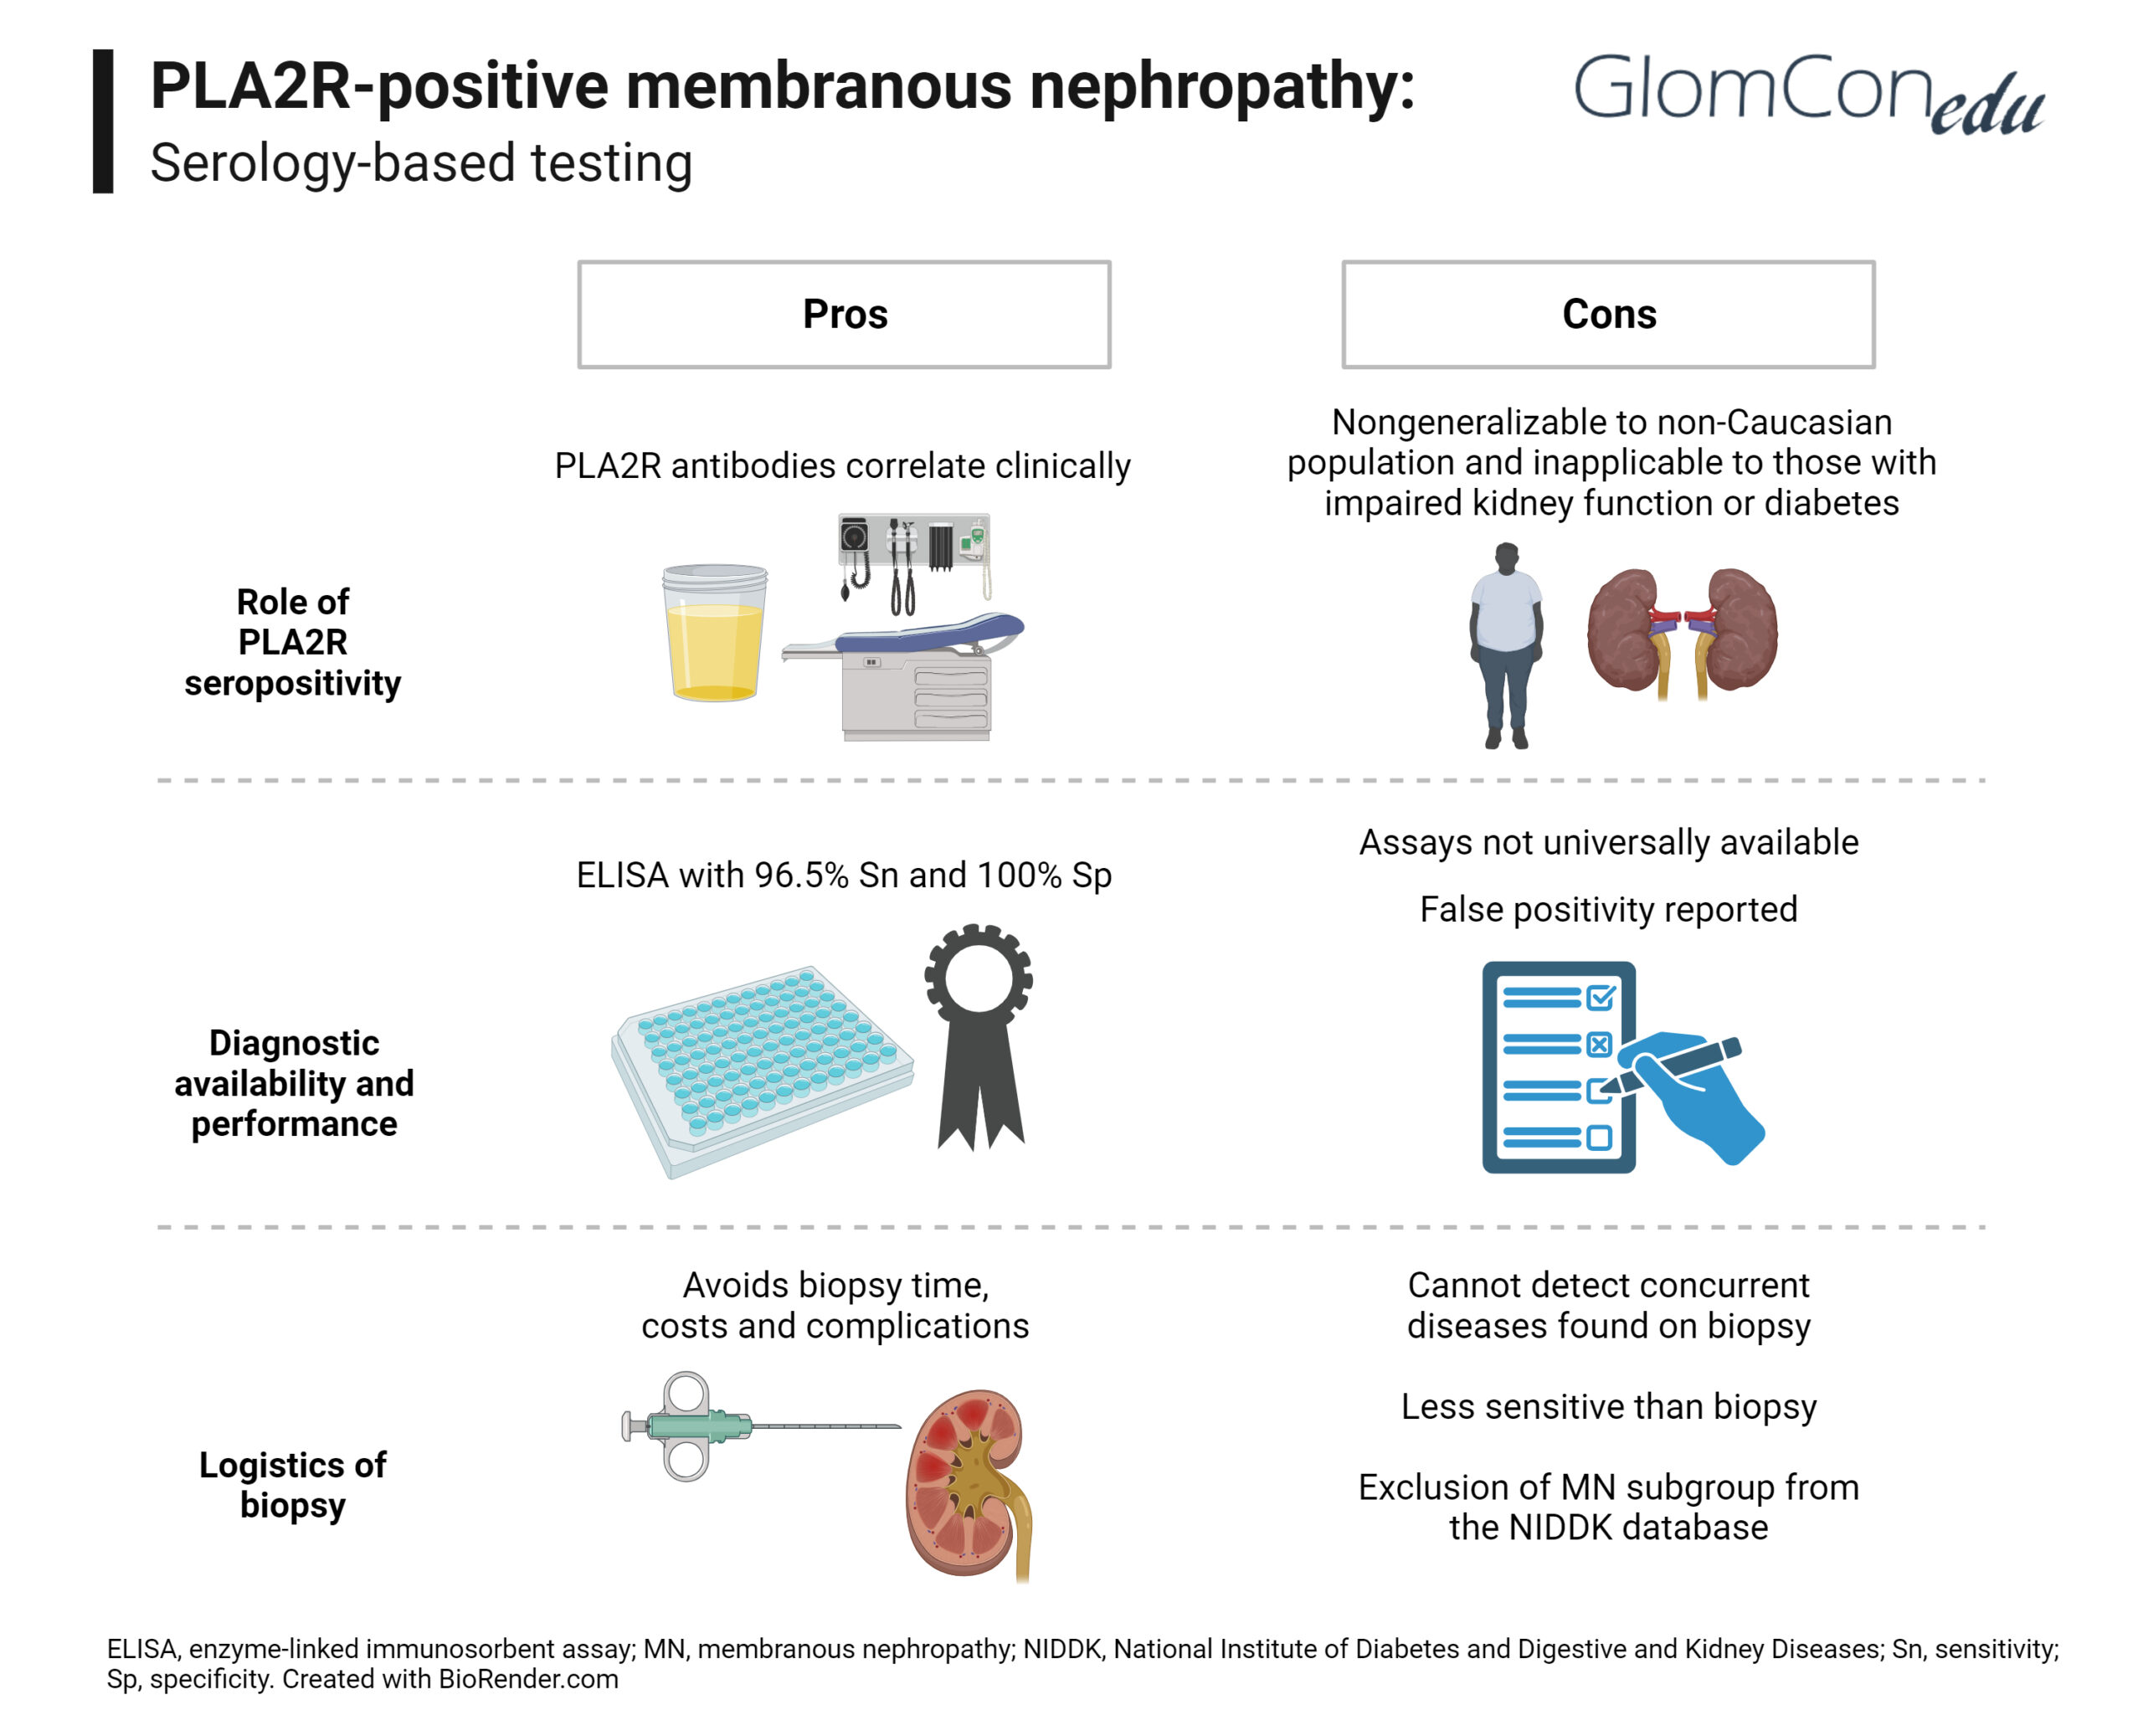 Pros and Cons of Serology-Based Testing for Primary Membranous Nephropathy  – GlomCon (pubs)